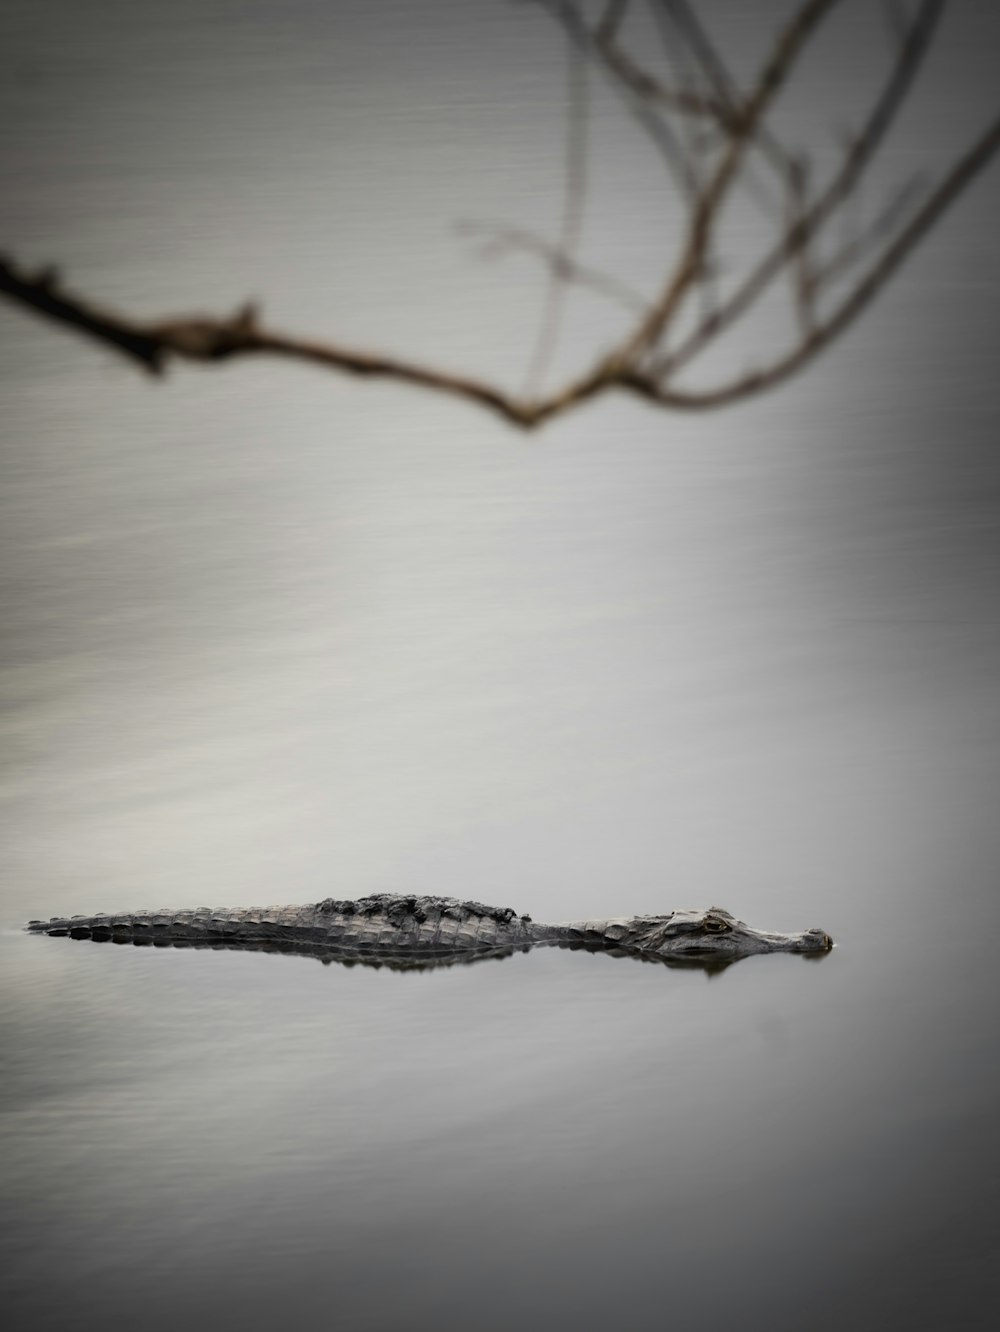 a small alligator is floating in the water